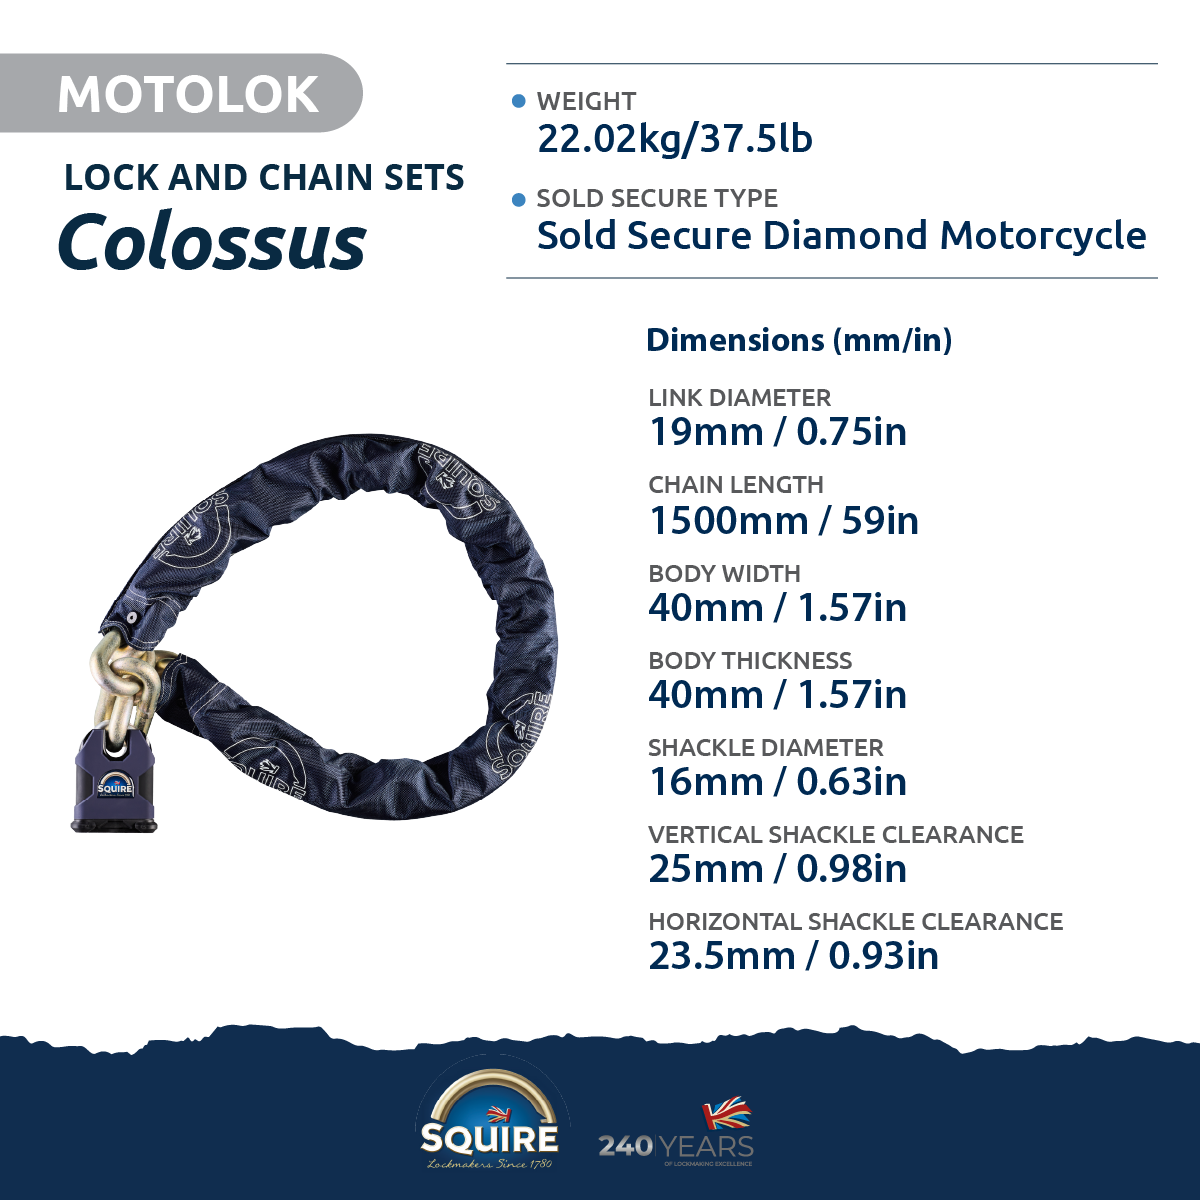 Colossus Padlock and Chain Set Specifications 1